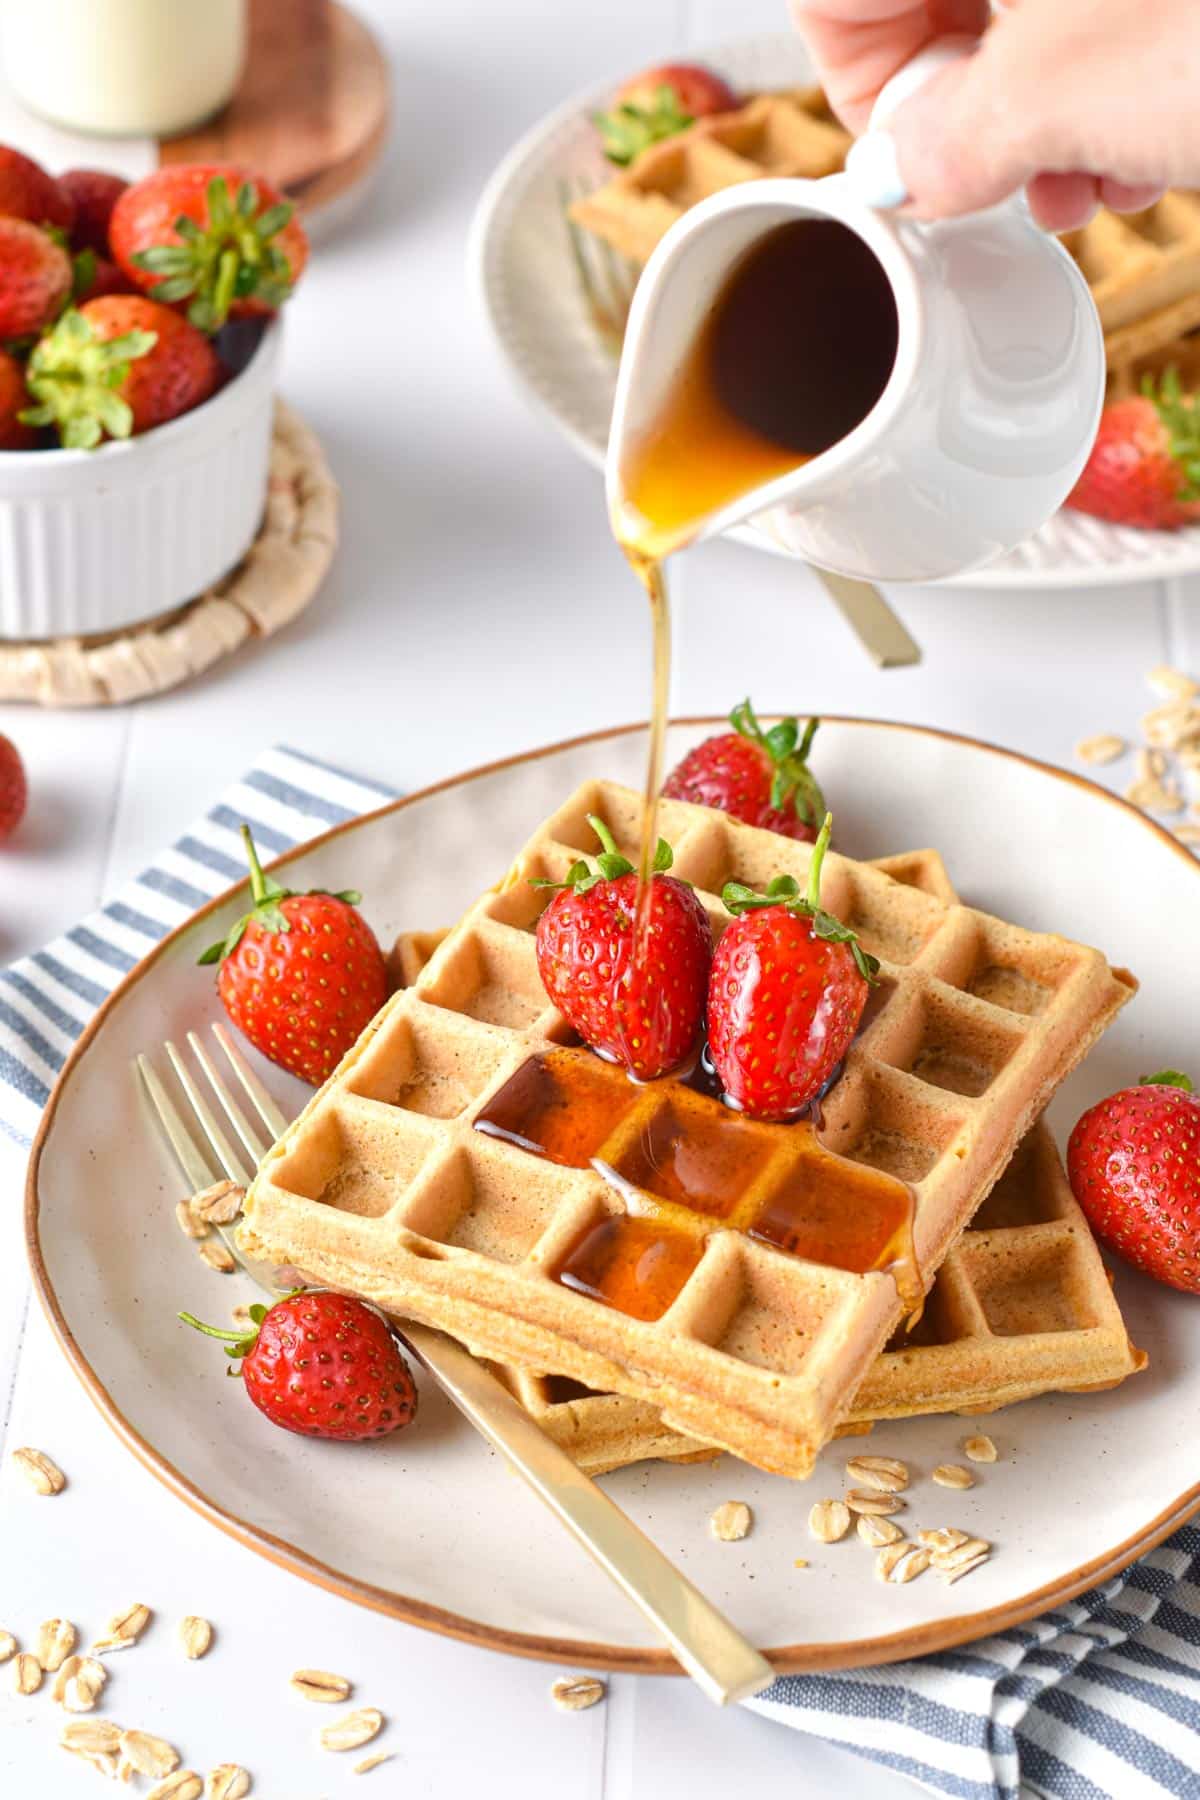 These Oat Flour Waffles are easy healthy breakfast waffles packed with proteins and fibers from oats. They are also refined sugar-free, gluten-free and so much better for you than regular waffles.